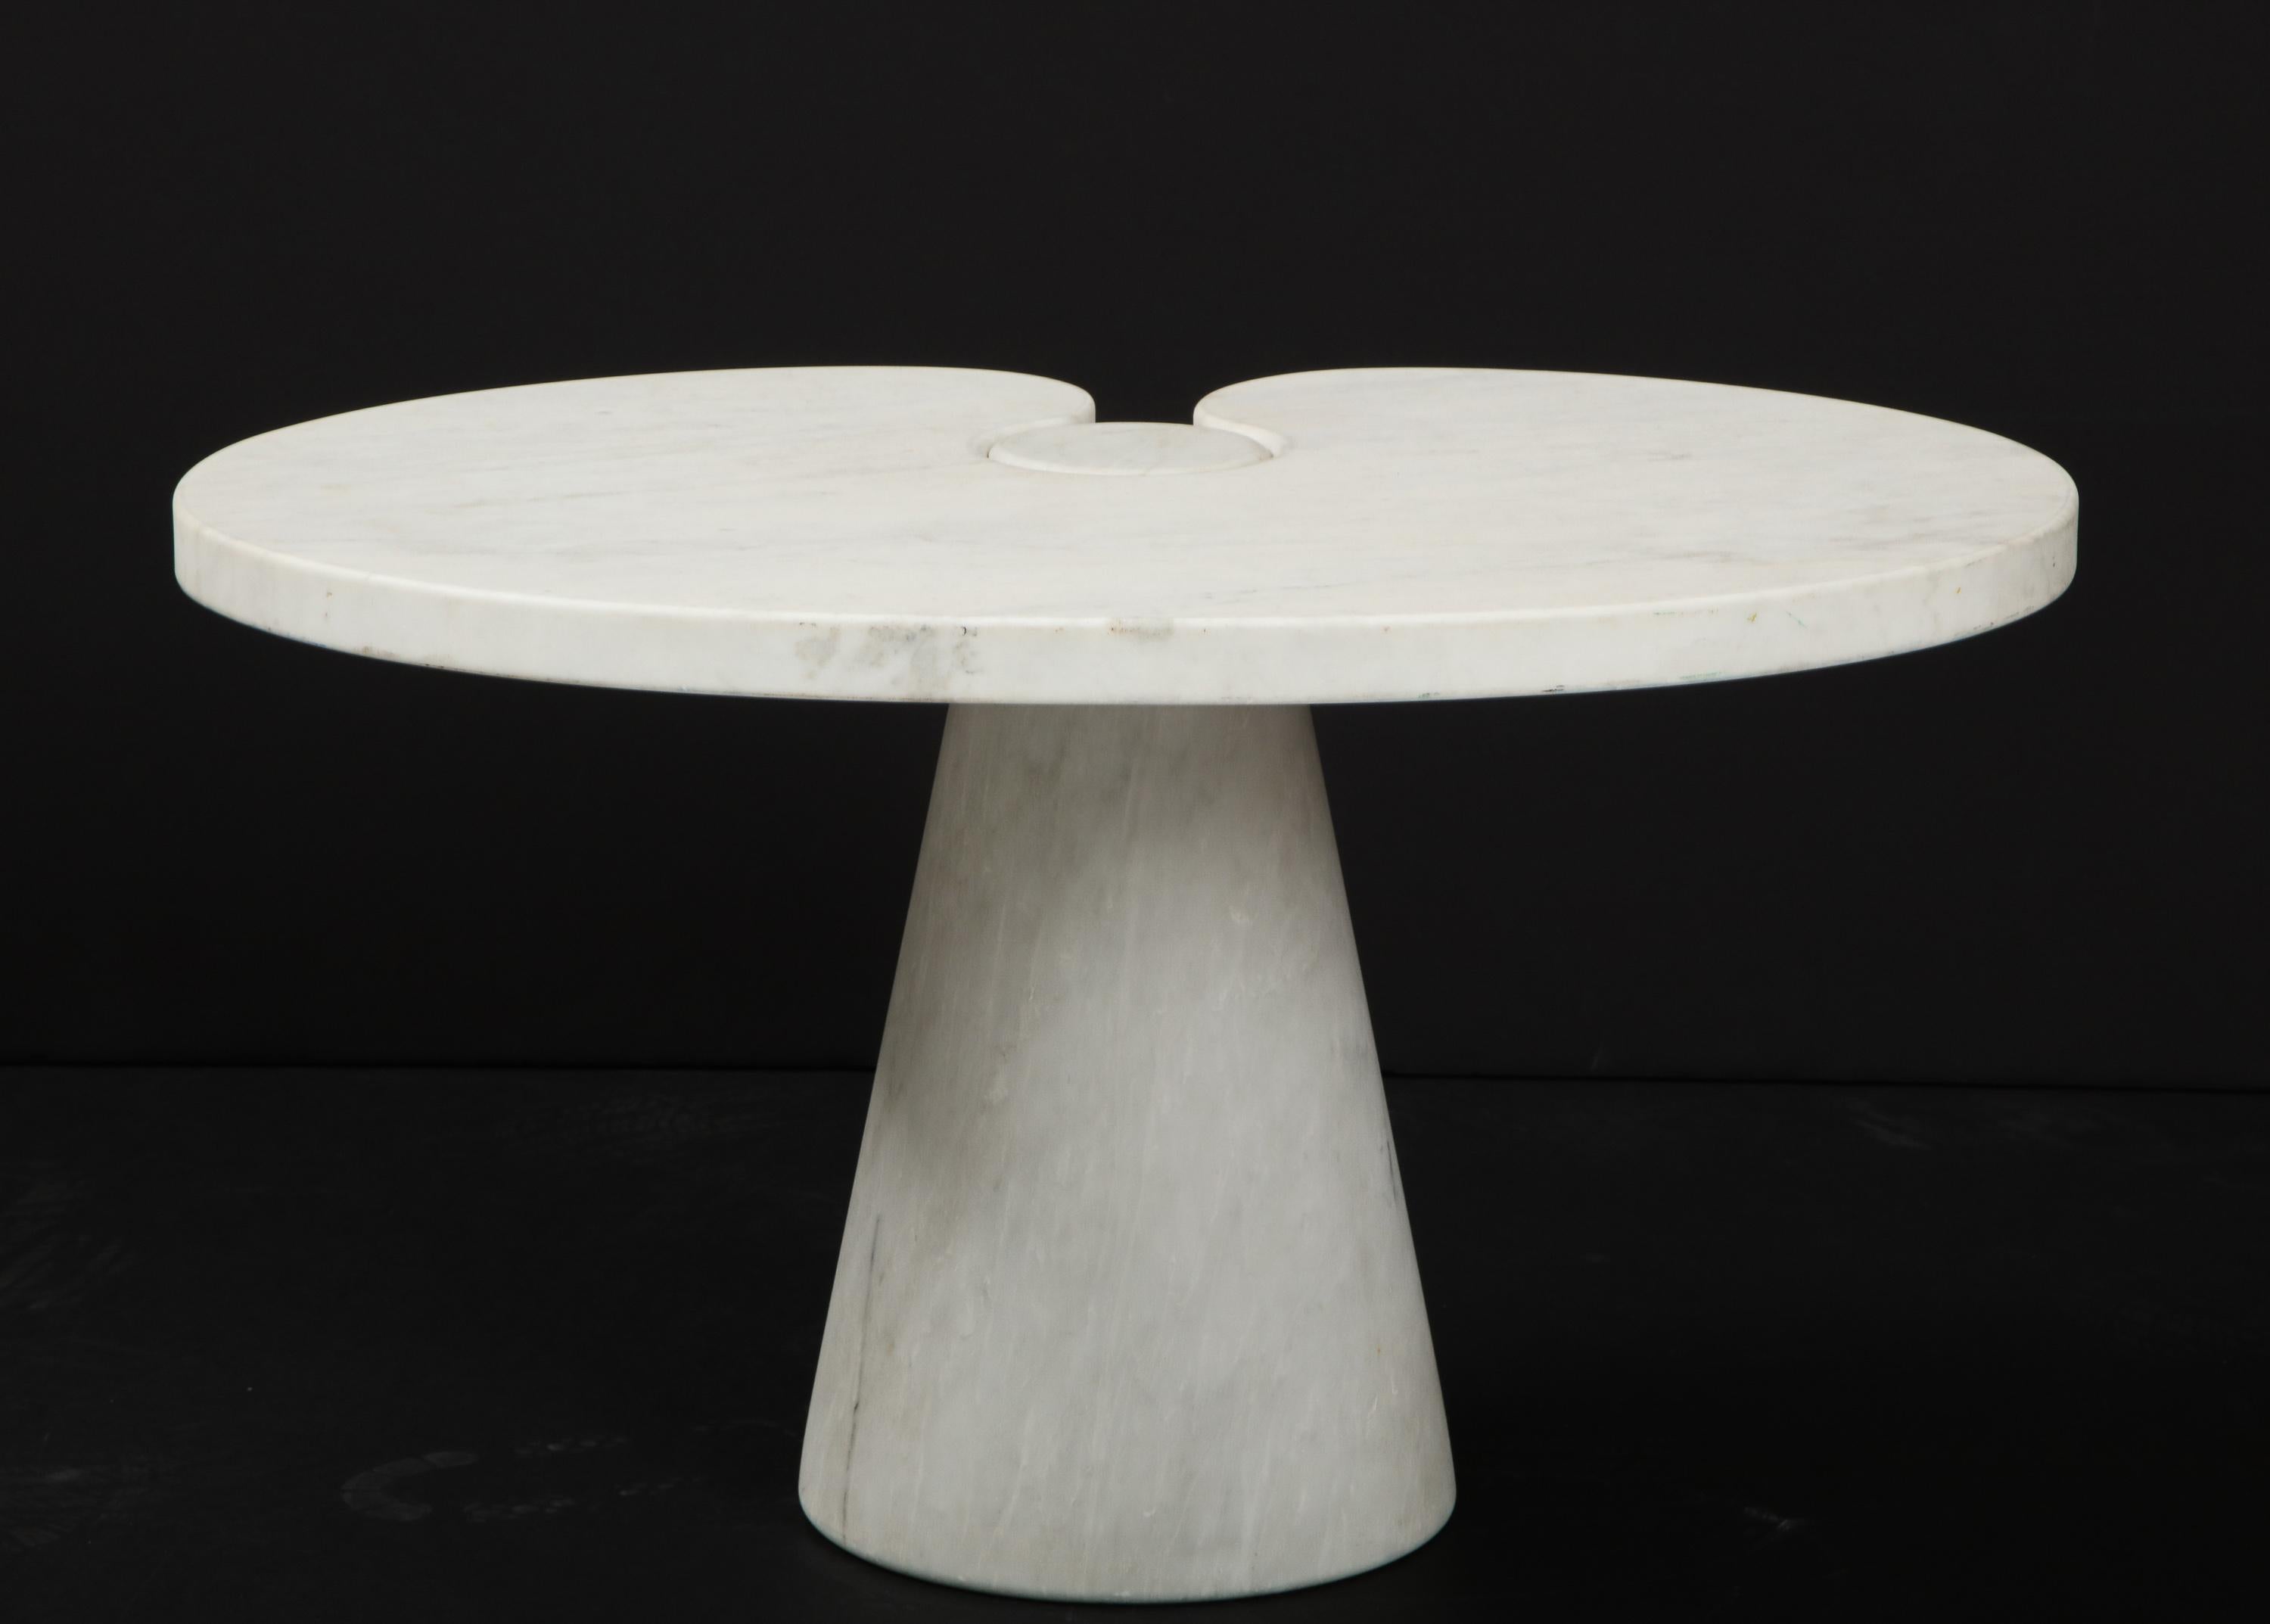 Two-piece interlocking Carrara marble side table from the Eros collection. Designed by Angelo Mangiarotti for Skipper, Italy. A vintage production, circa 1970s. Uncommon configuration at 26 inches in width, more useful as a side table or cocktail